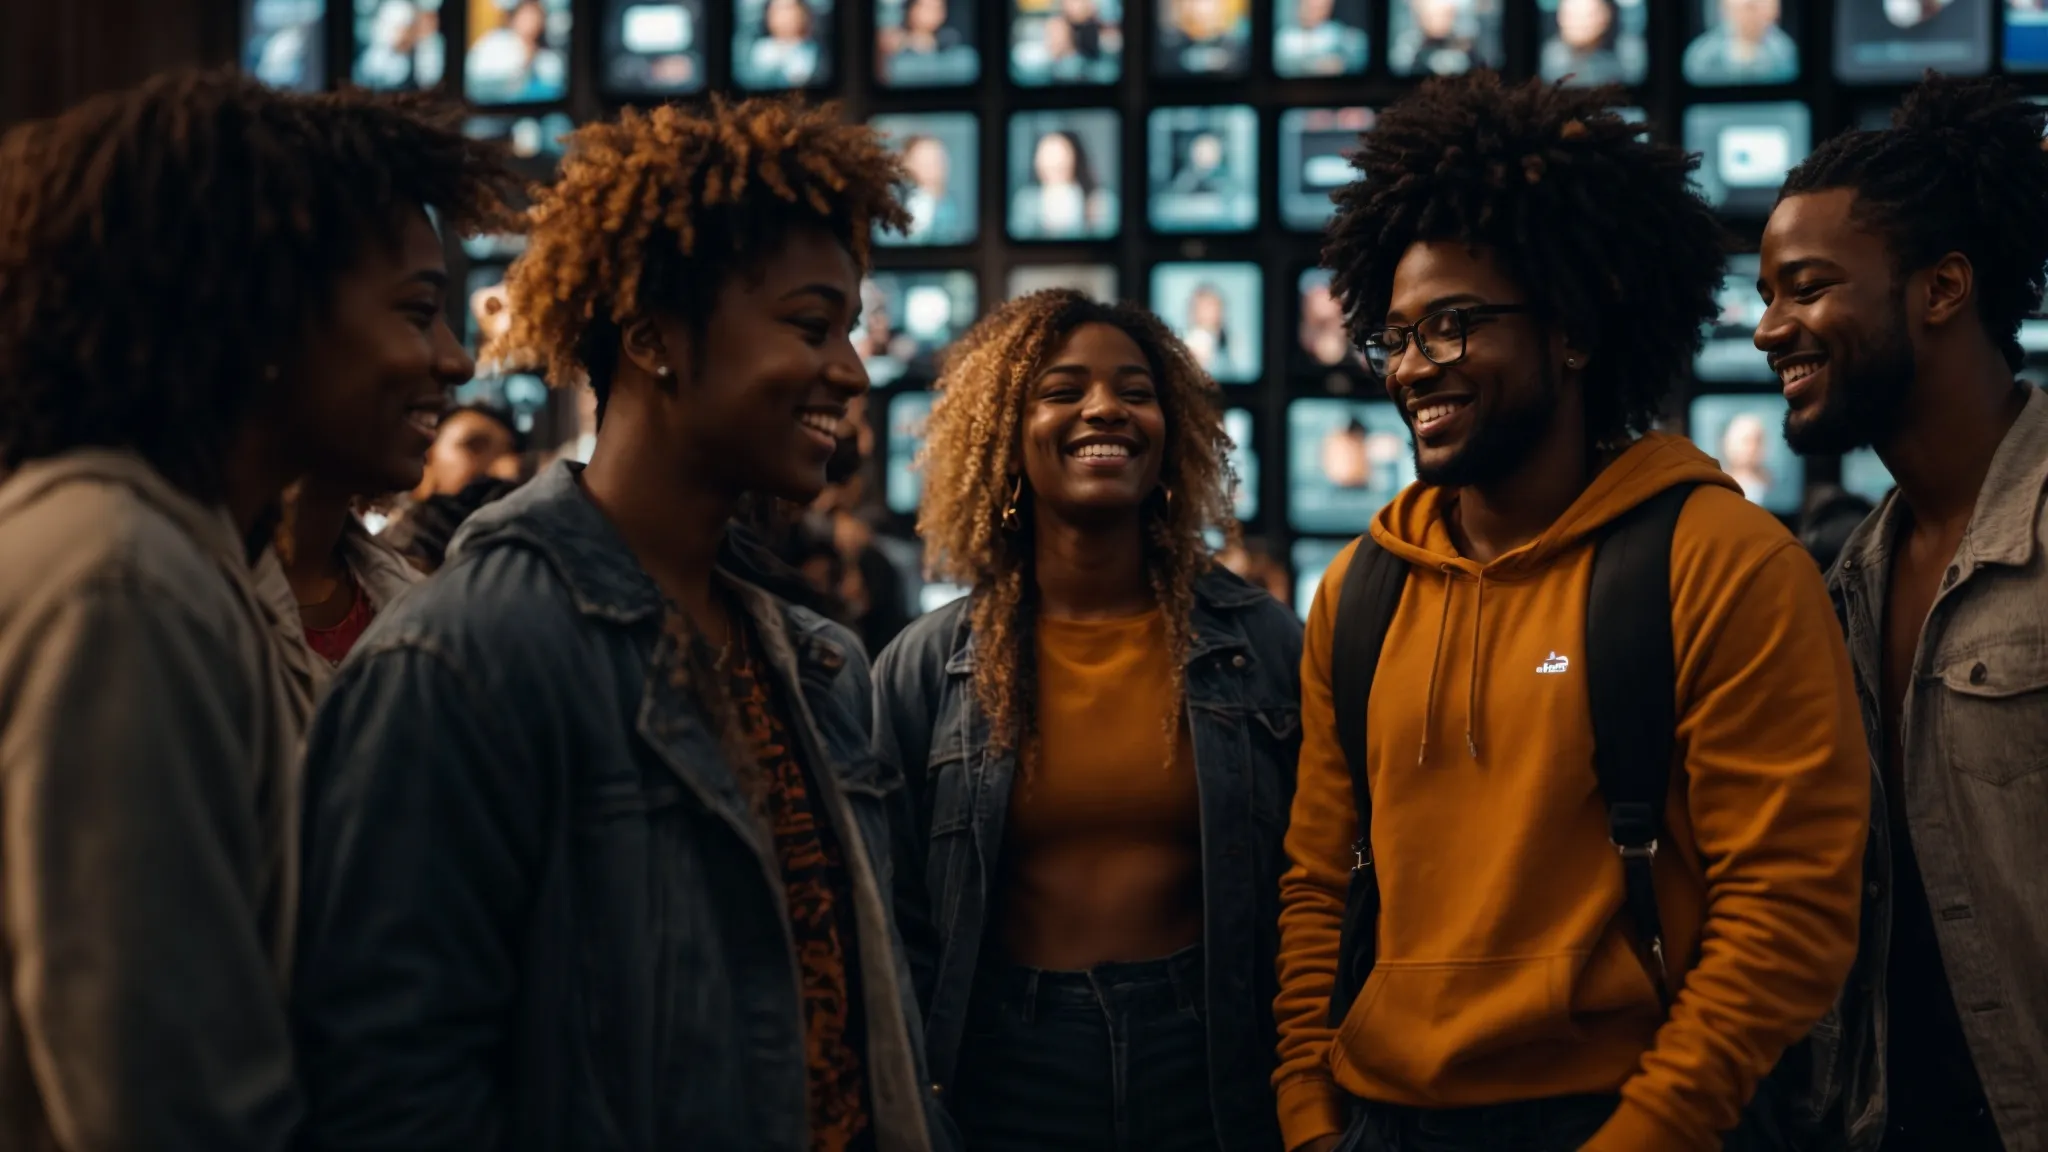 a group of diverse people smiling and interacting around a large, glowing digital screen displaying social media icons.